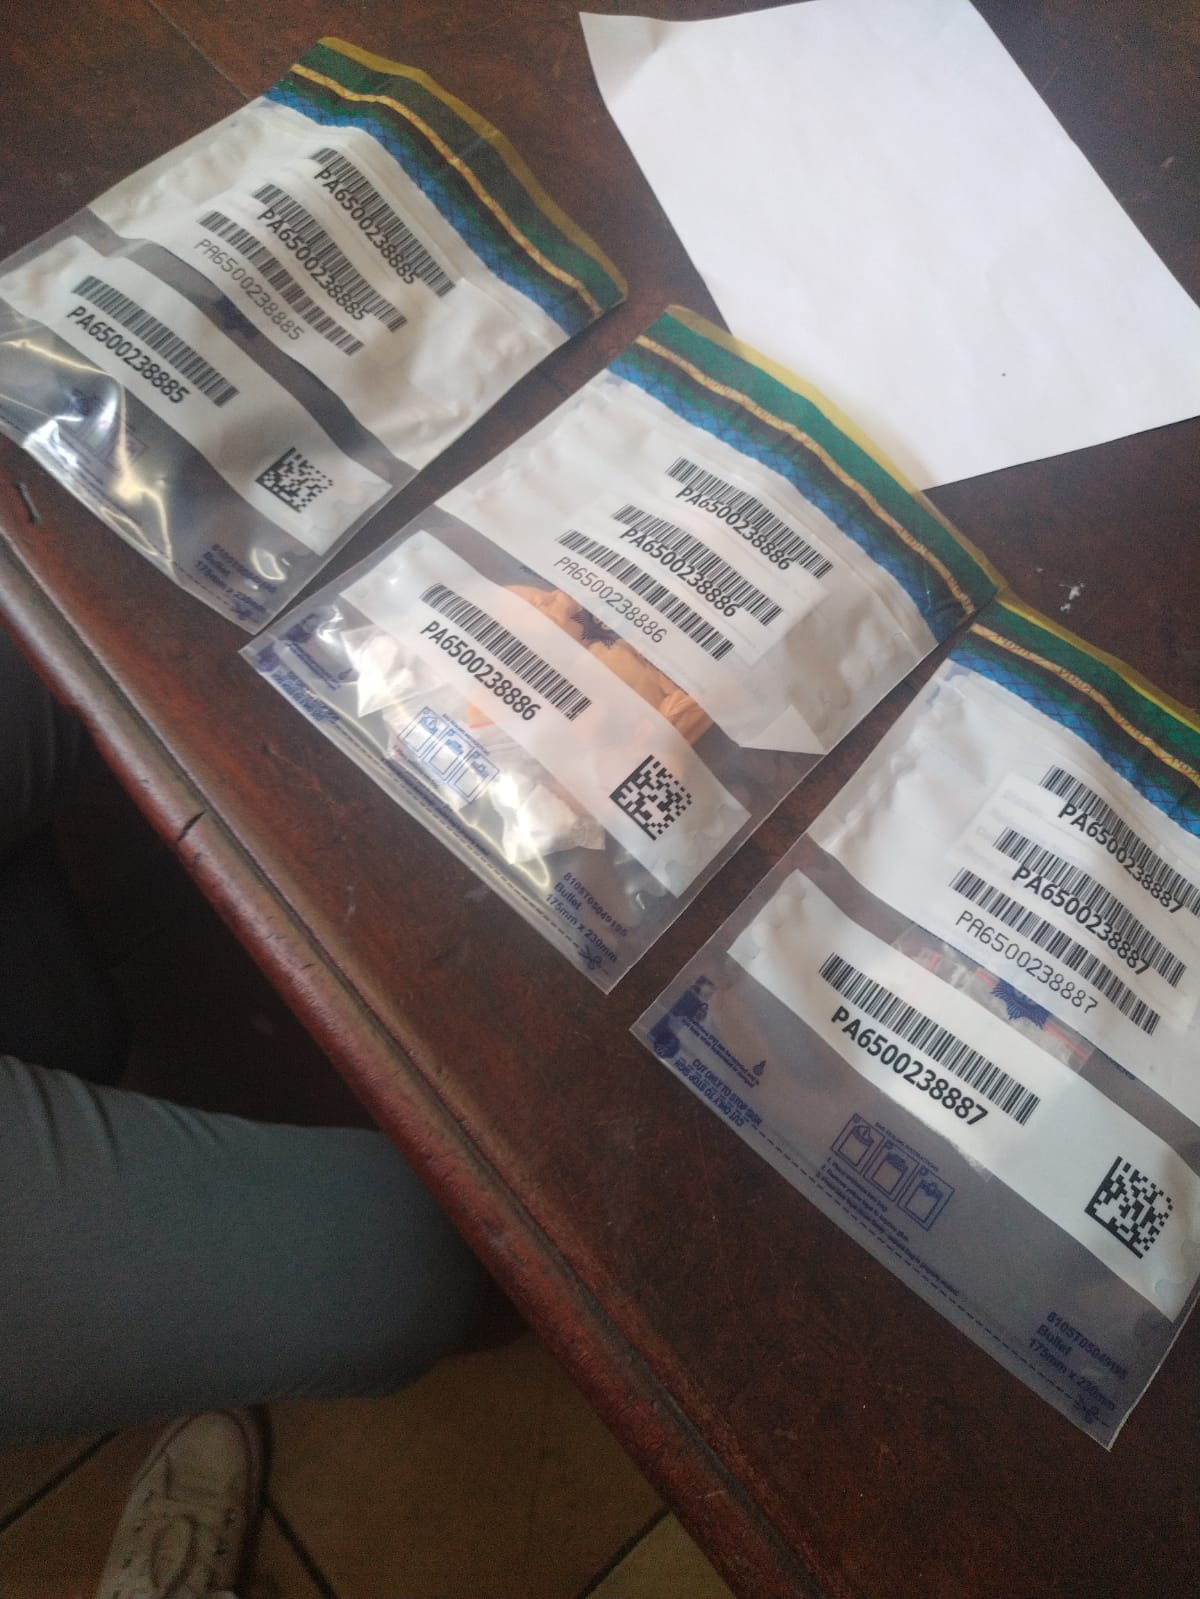 Provincial Crime Investigation Unit is winning the fight against illicit drugs in Limpopo